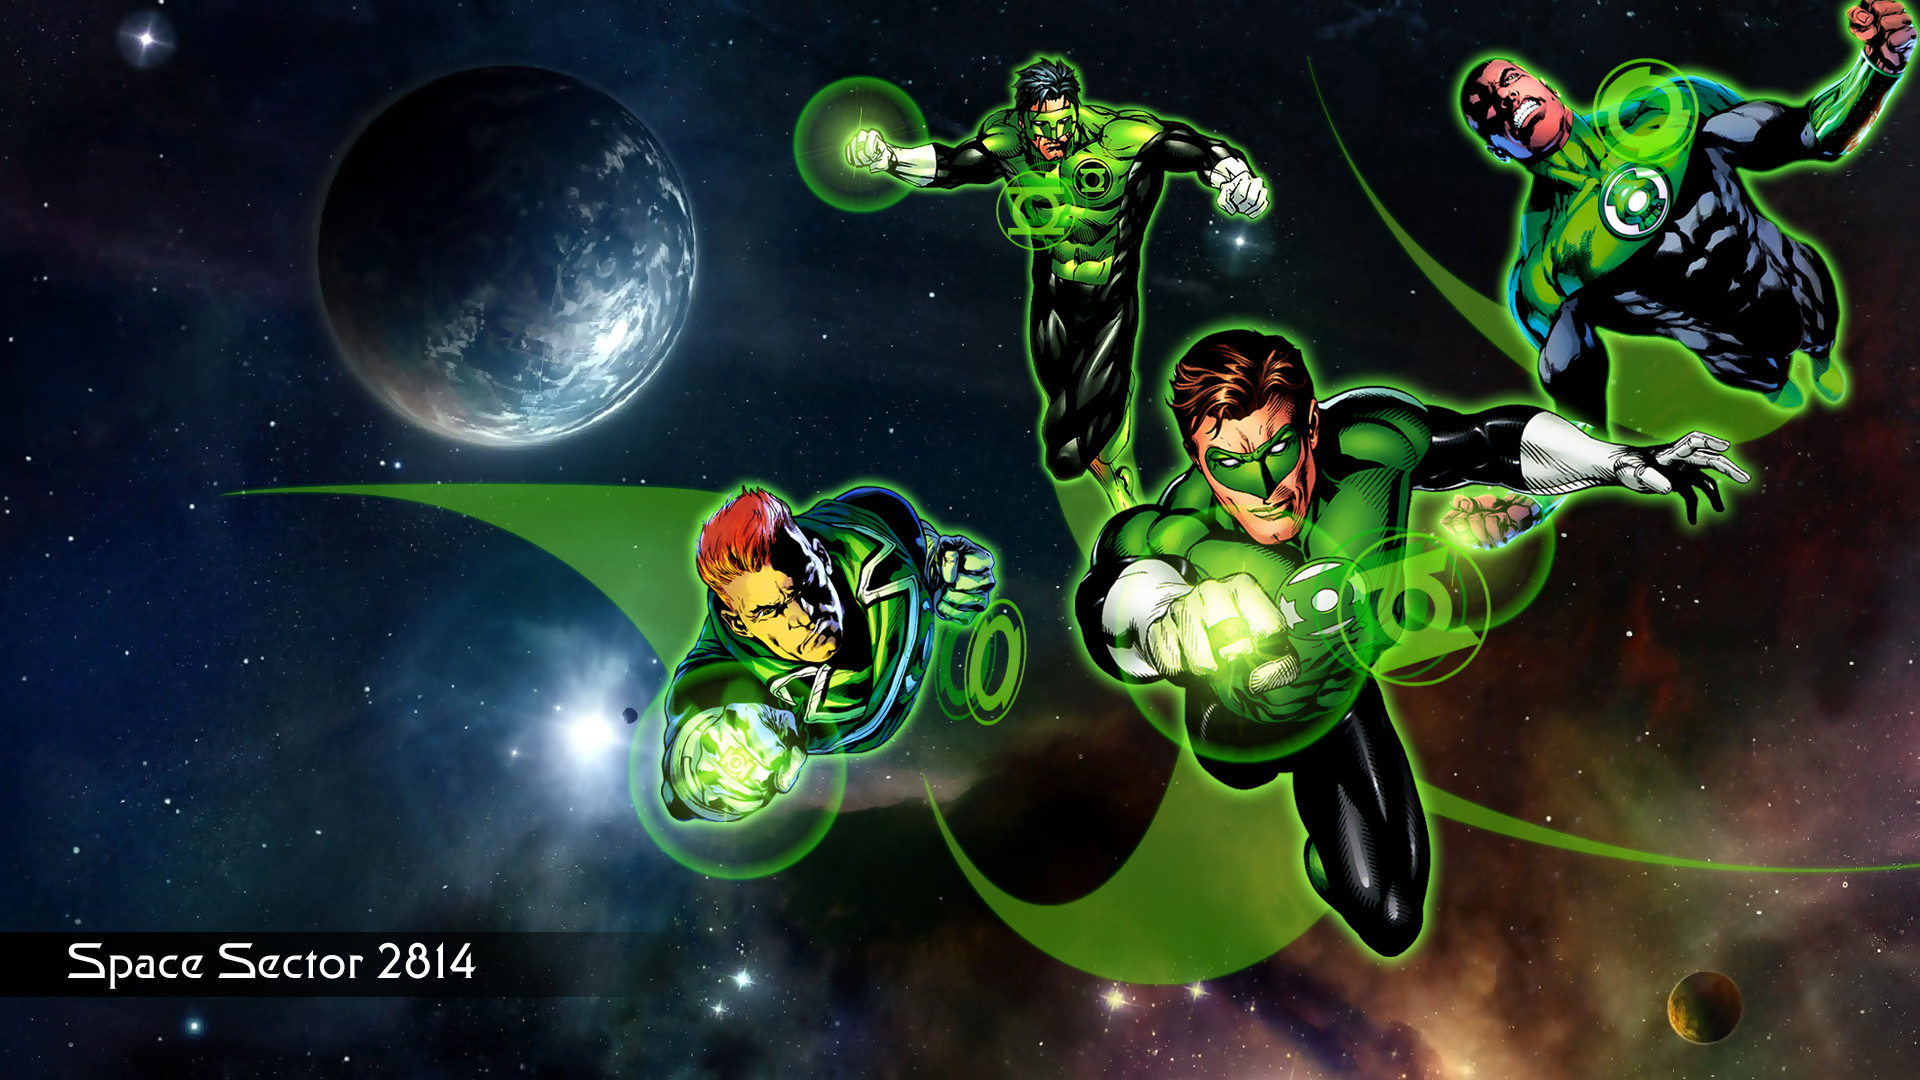 1920x1080 ... Green Lantern Corps Sector 2814 Fin by gomur